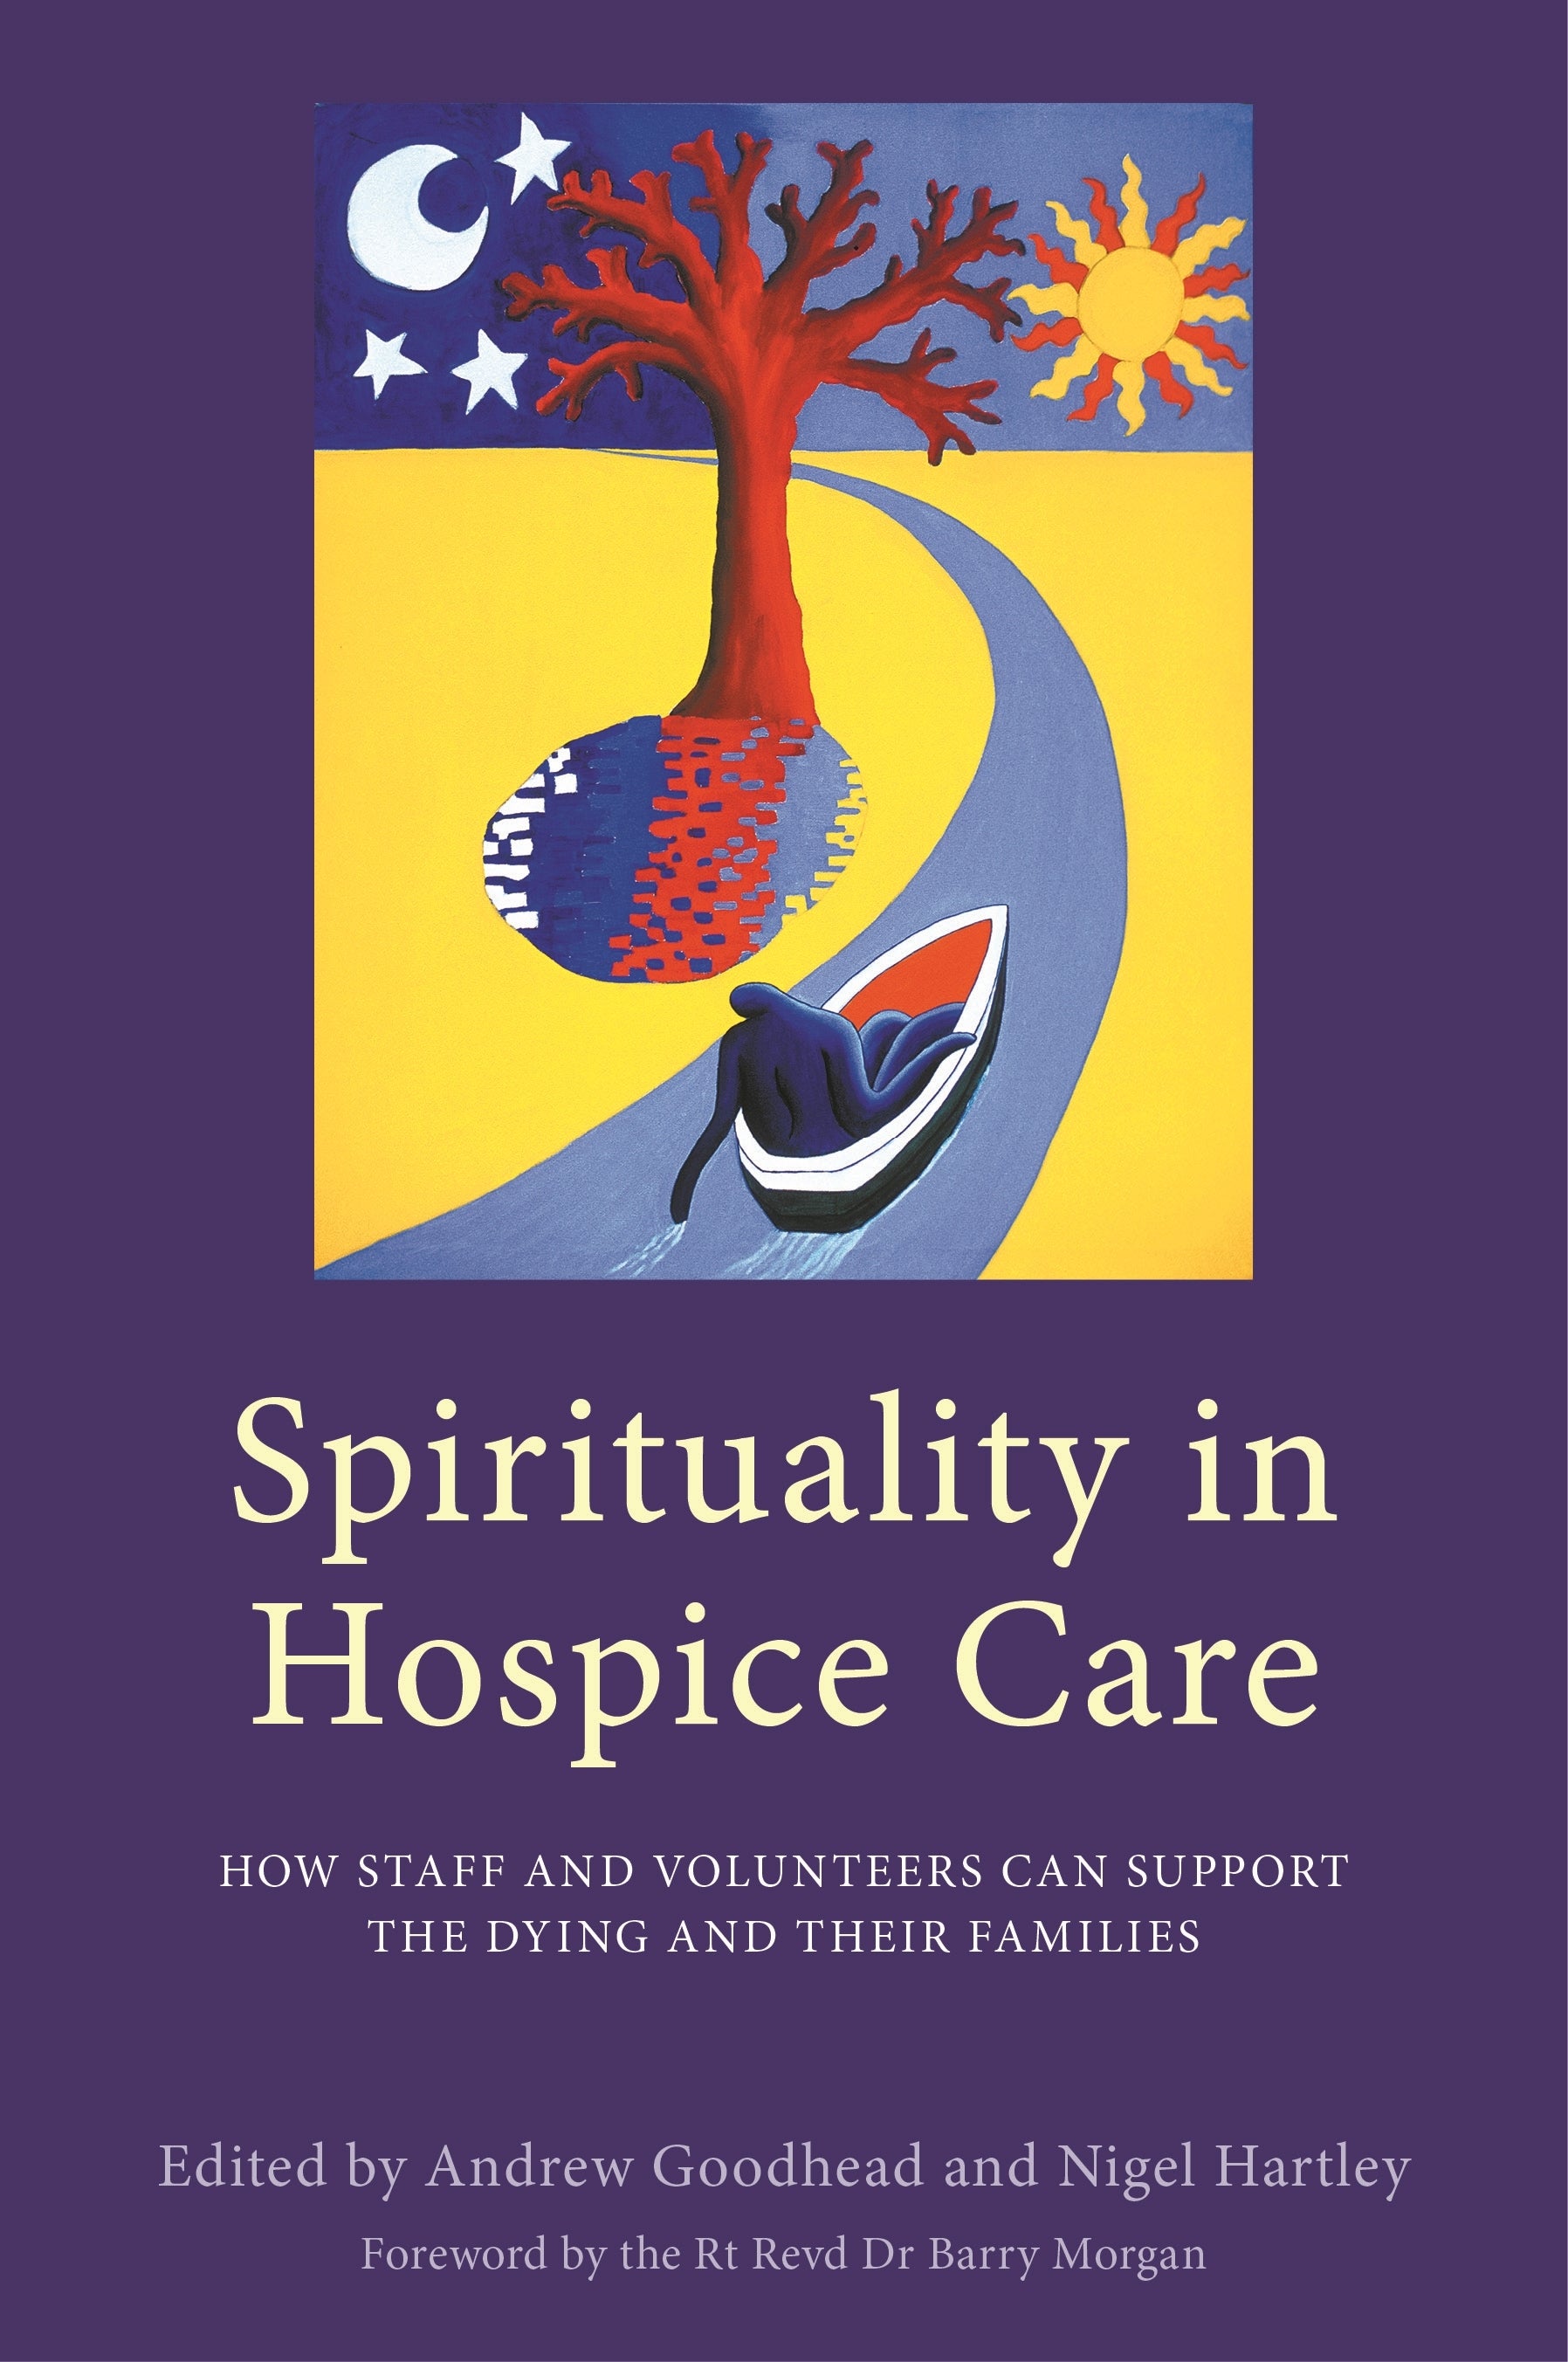 Spirituality in Hospice Care by No Author Listed, Nigel Hartley, Andrew Goodhead